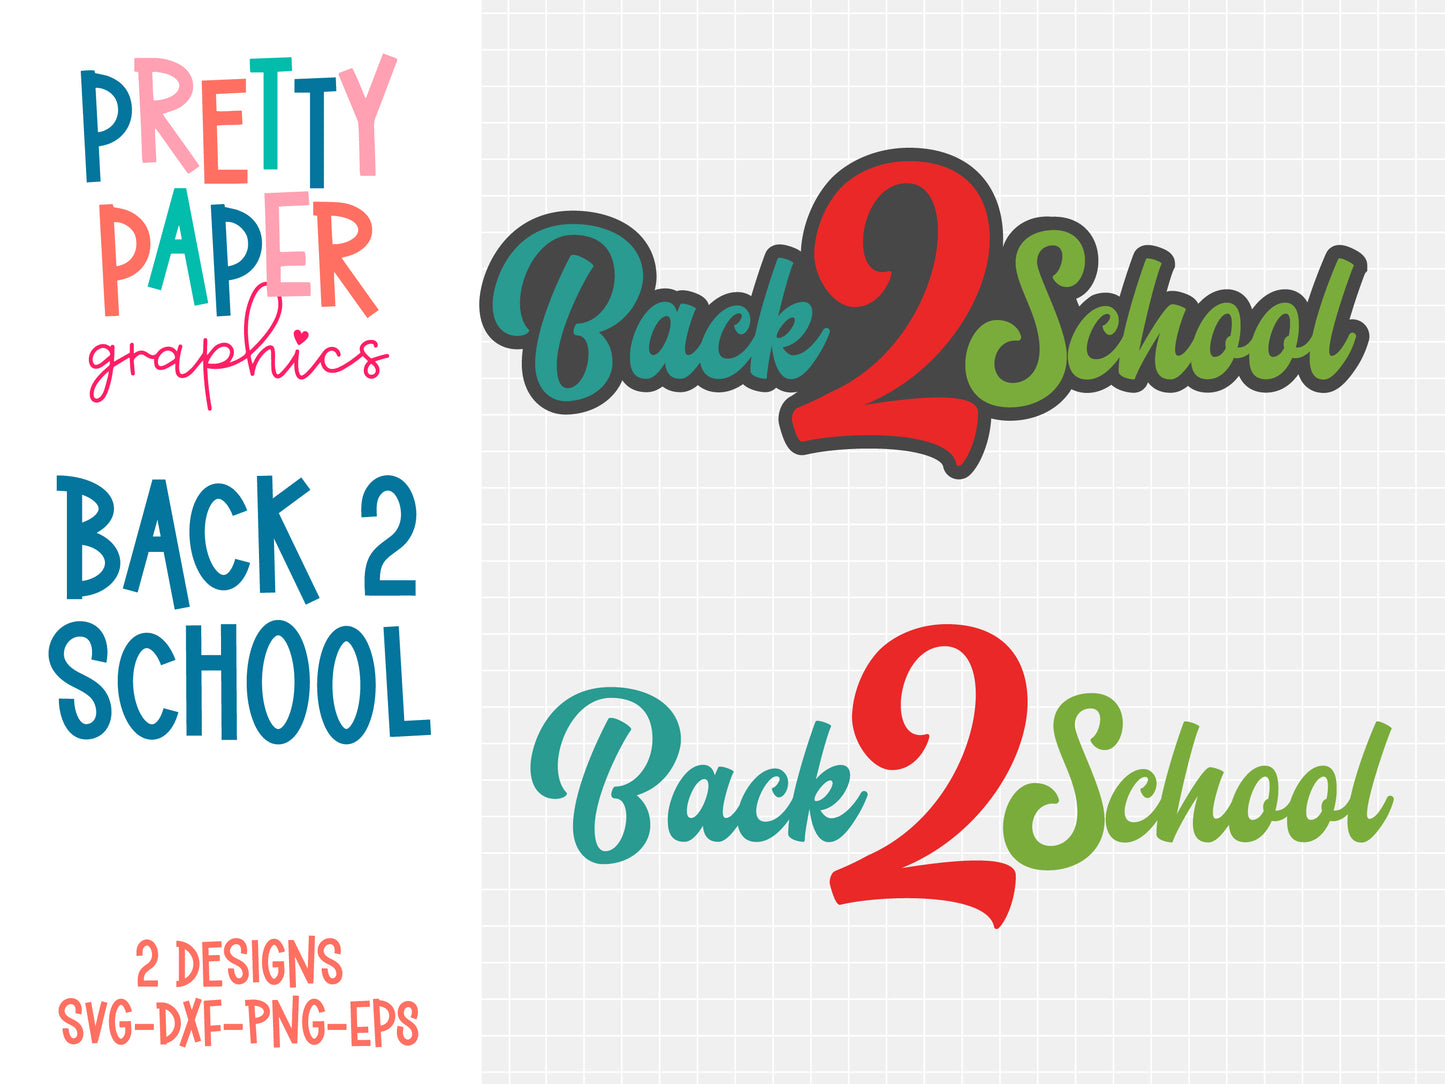 Back 2 School SVG Cut Files by Pretty Paper Graphics